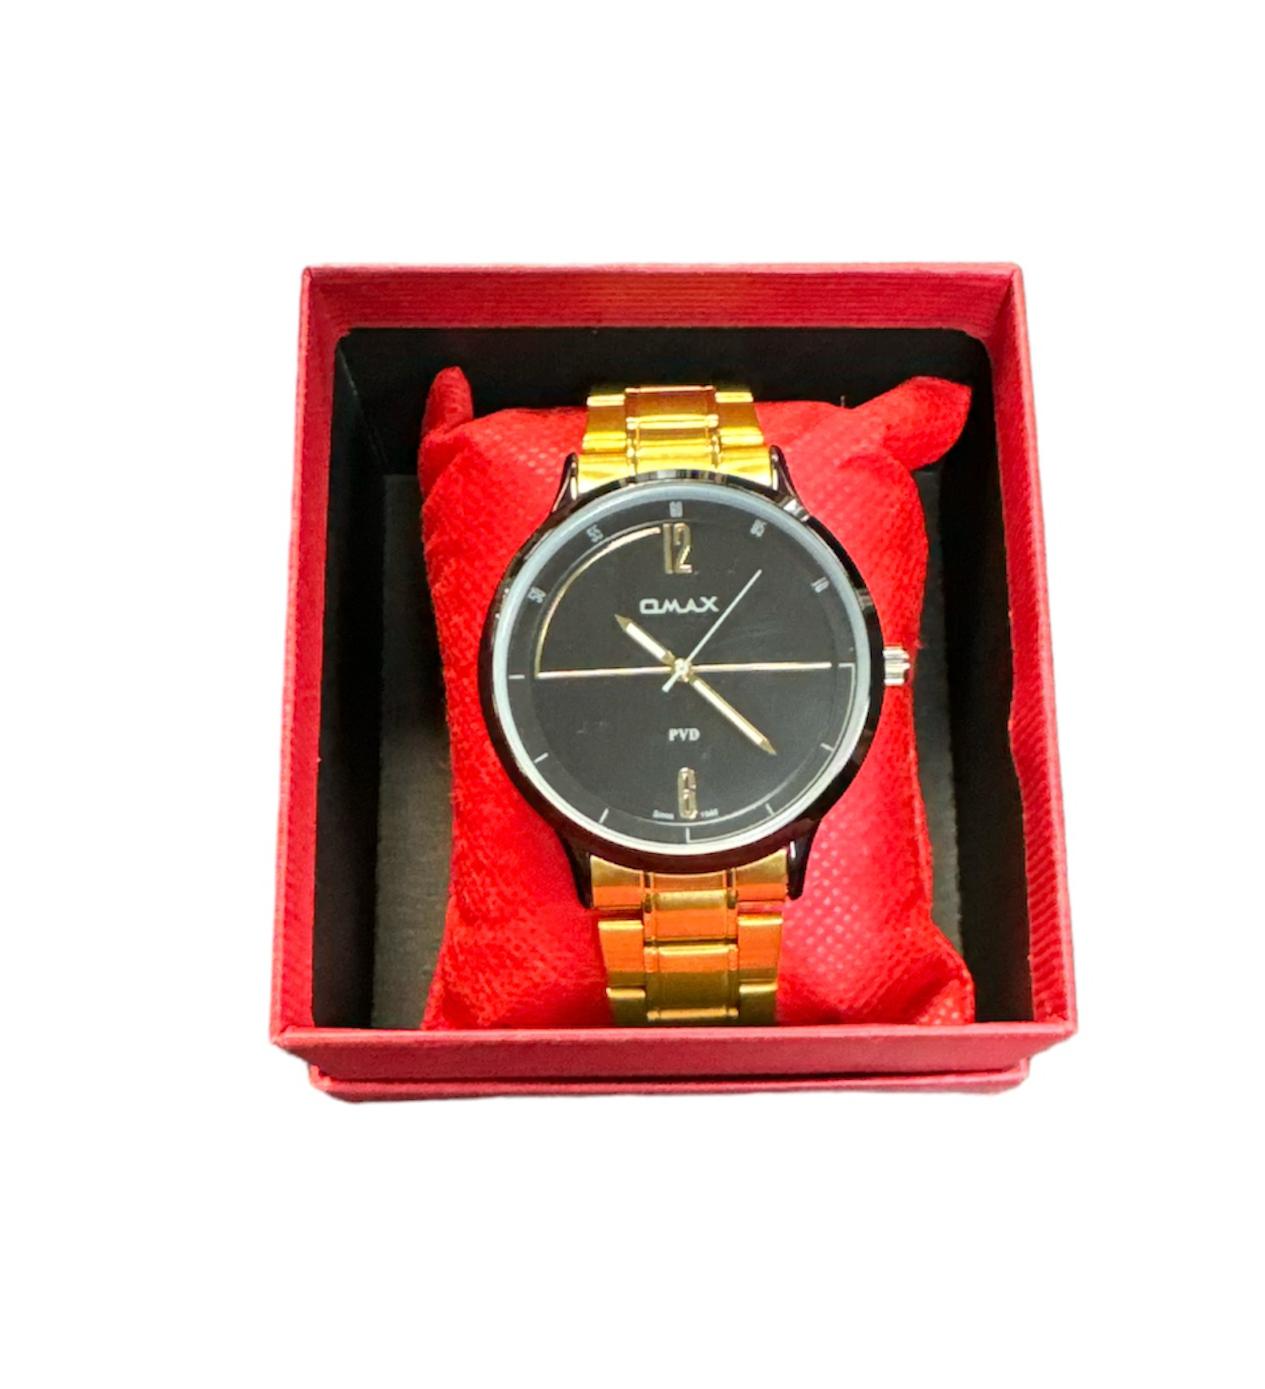 Qmax Watch Boxed